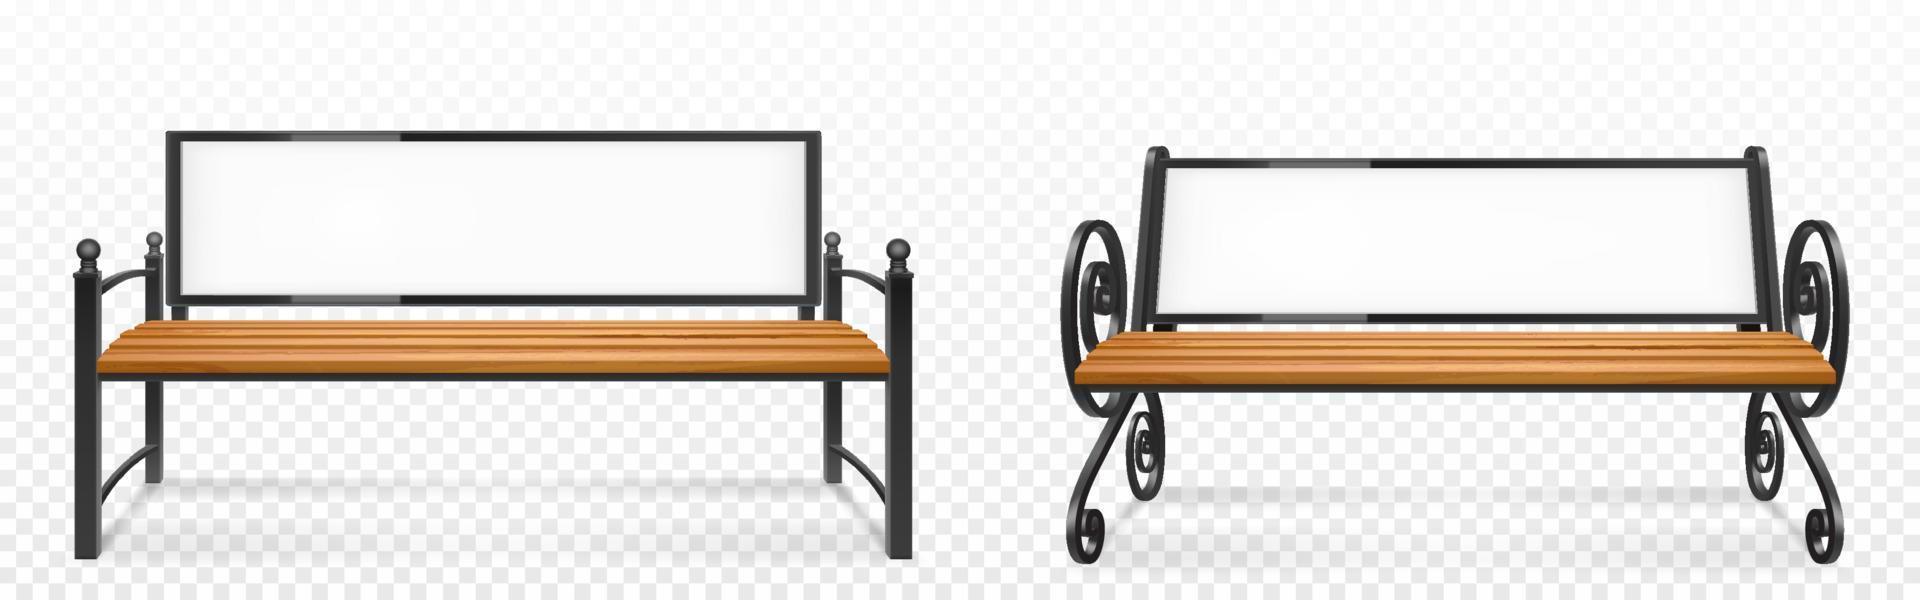 Wooden bench with empty advertising banner vector